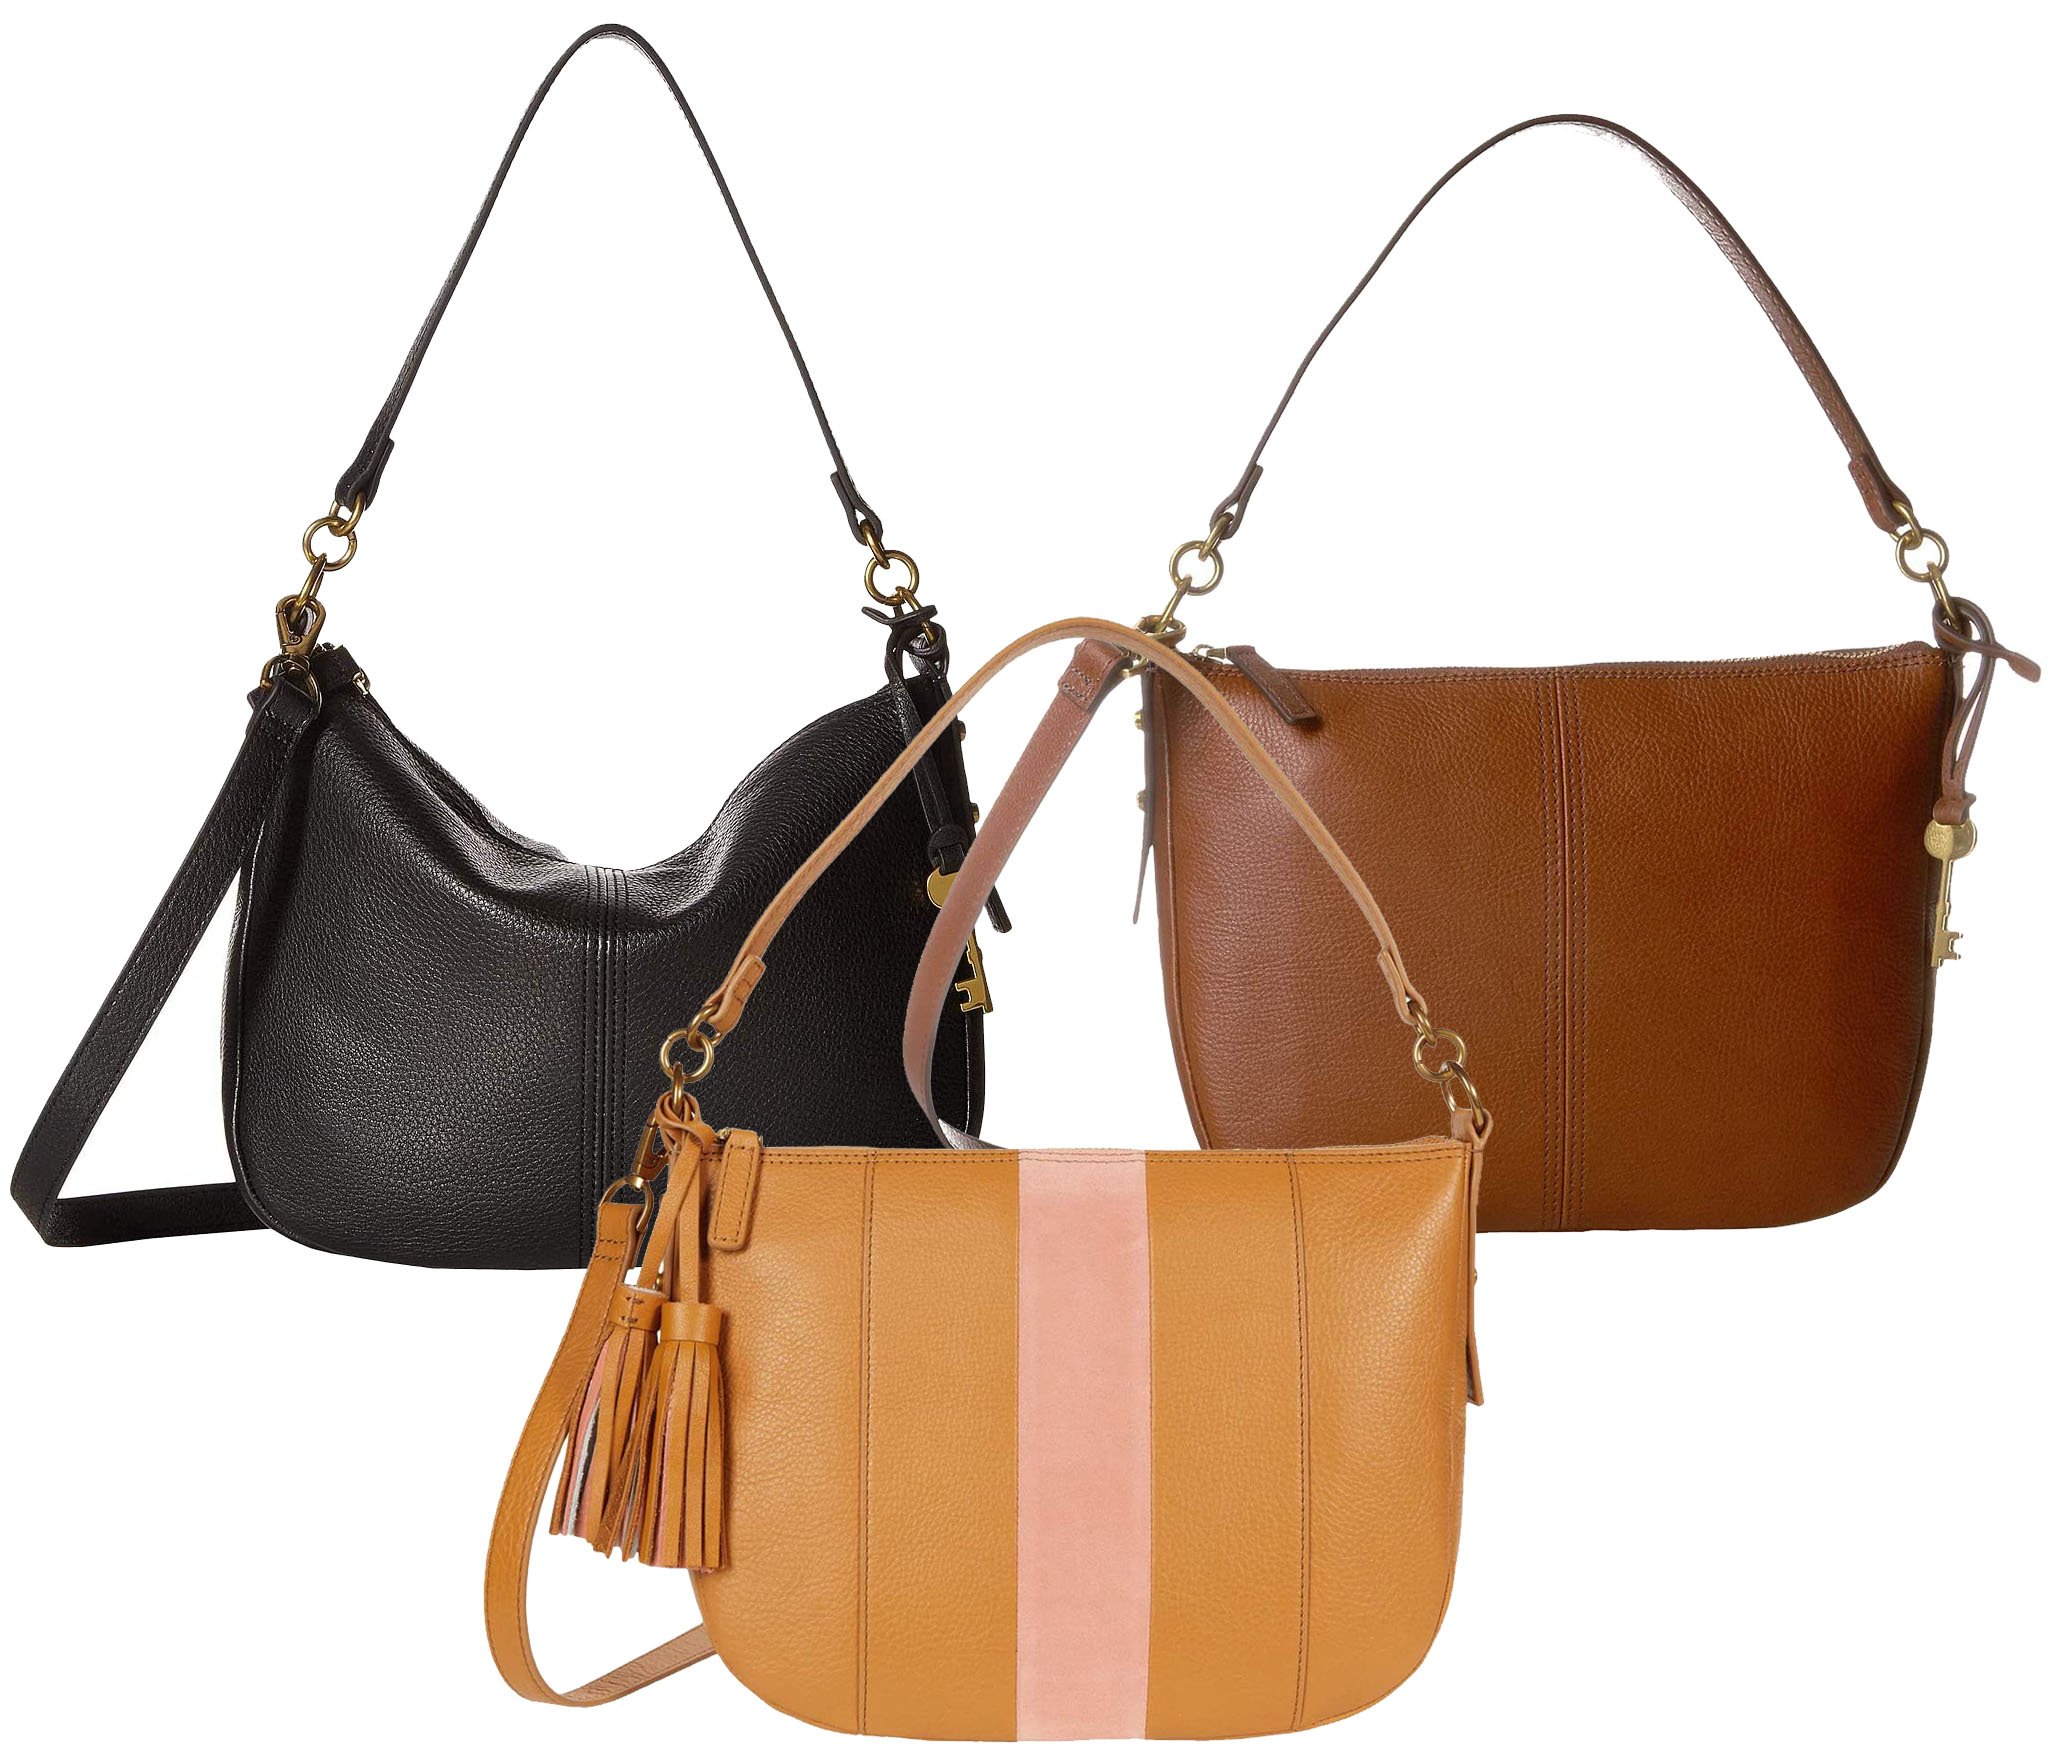 Carry your essentials and more in this timeless yet chic Jolie crossbody bag